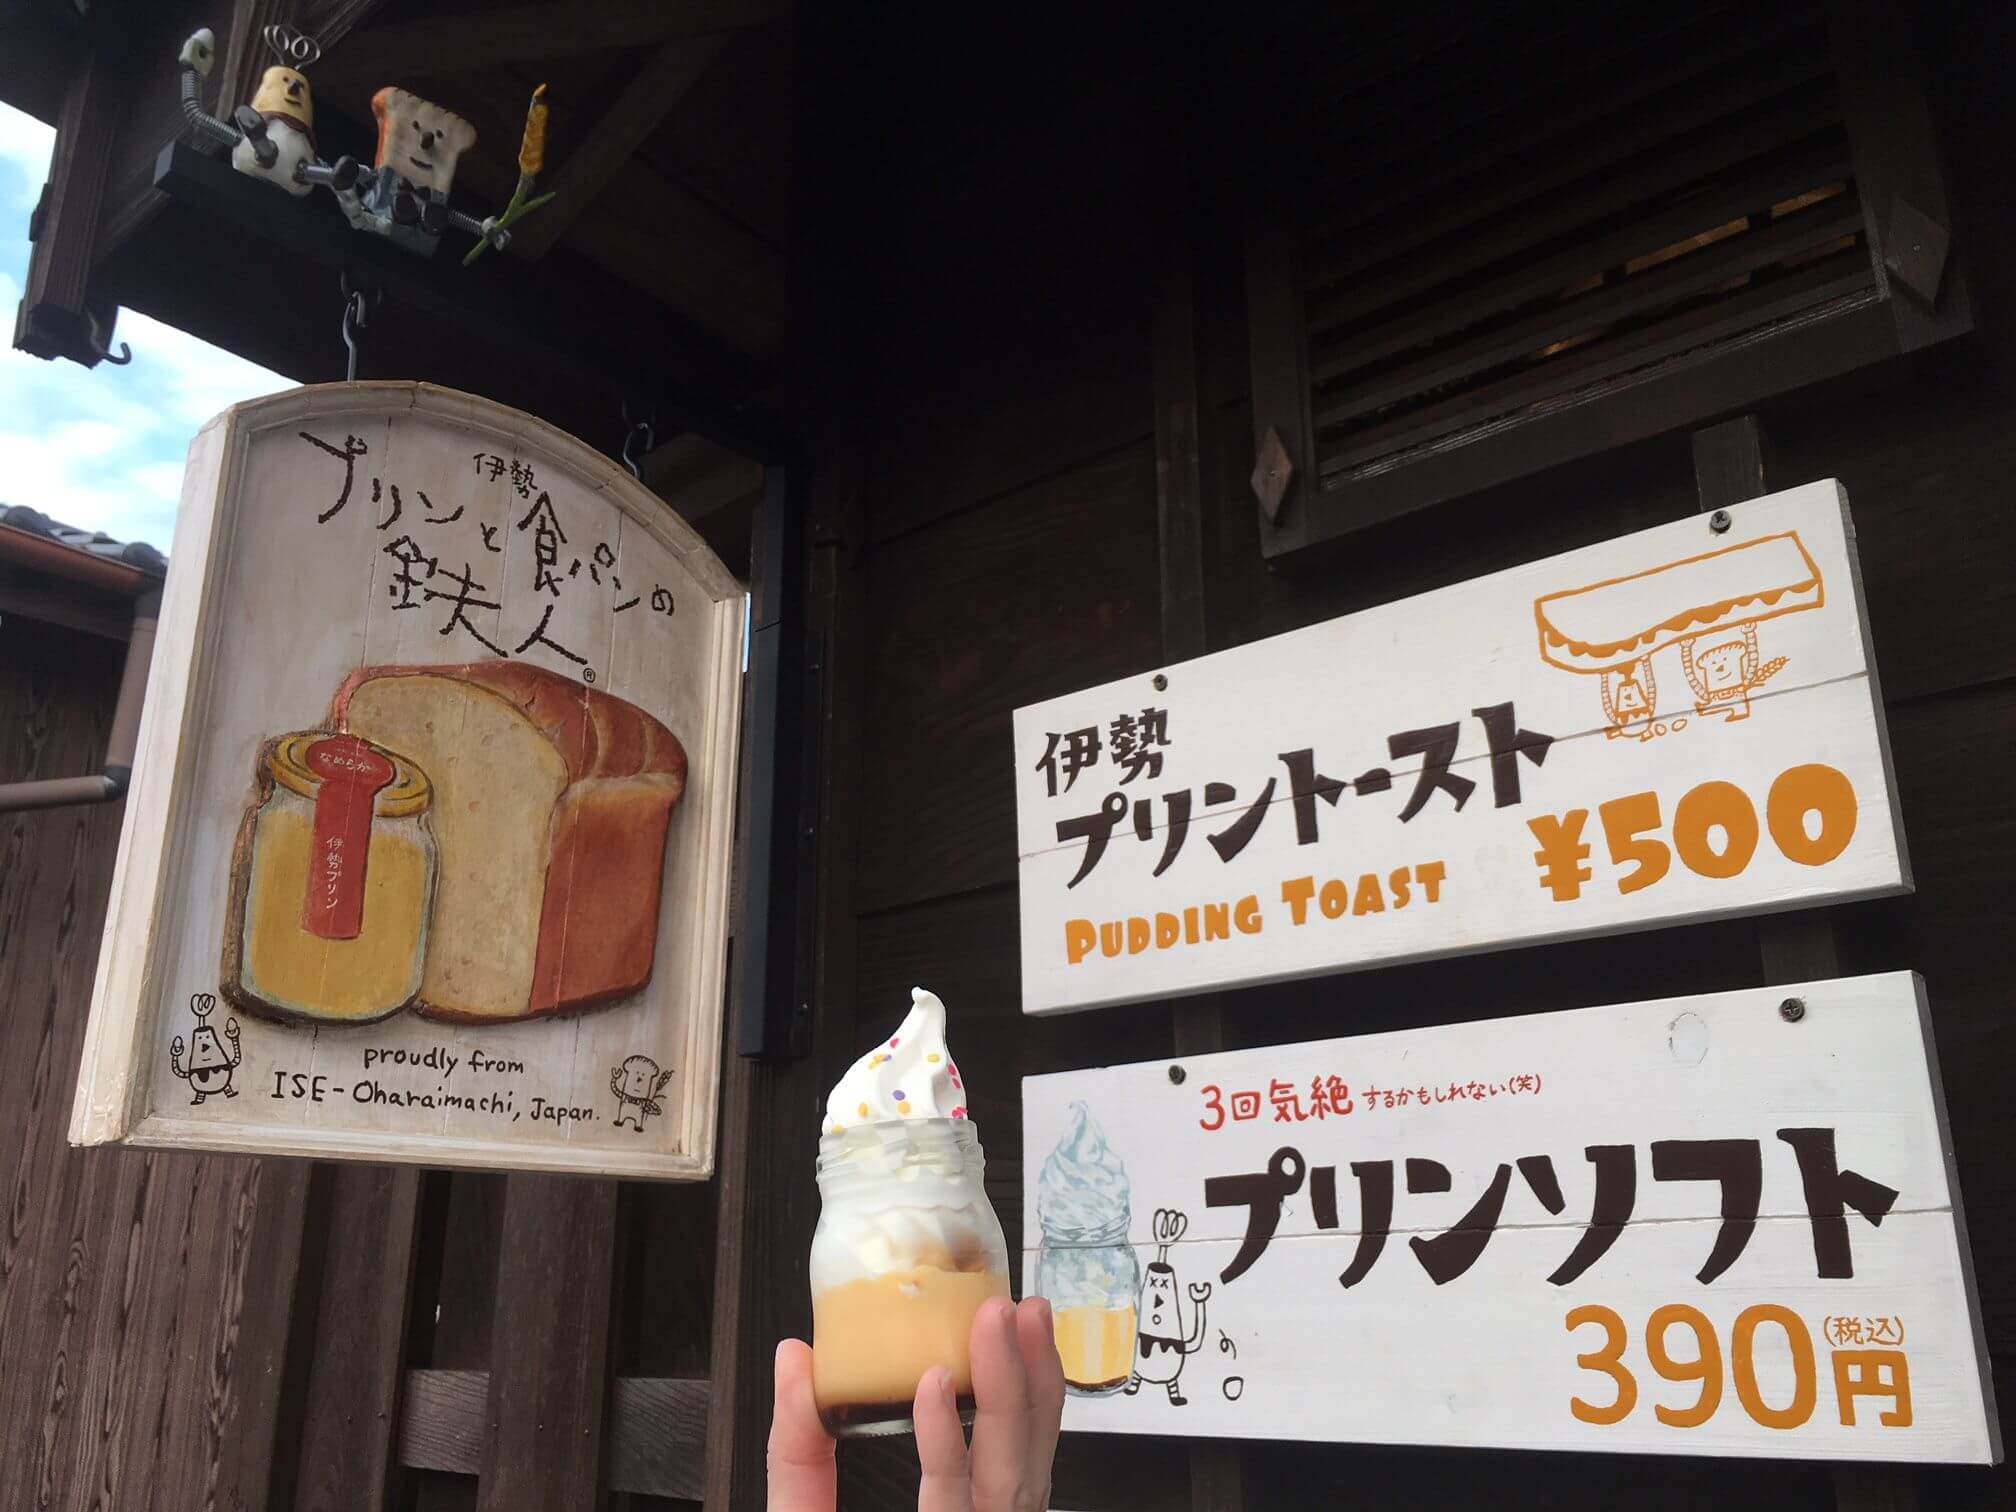 New ‘Purin Soft’ Dessert Released at Ise Purin no Tetsujin in Ise